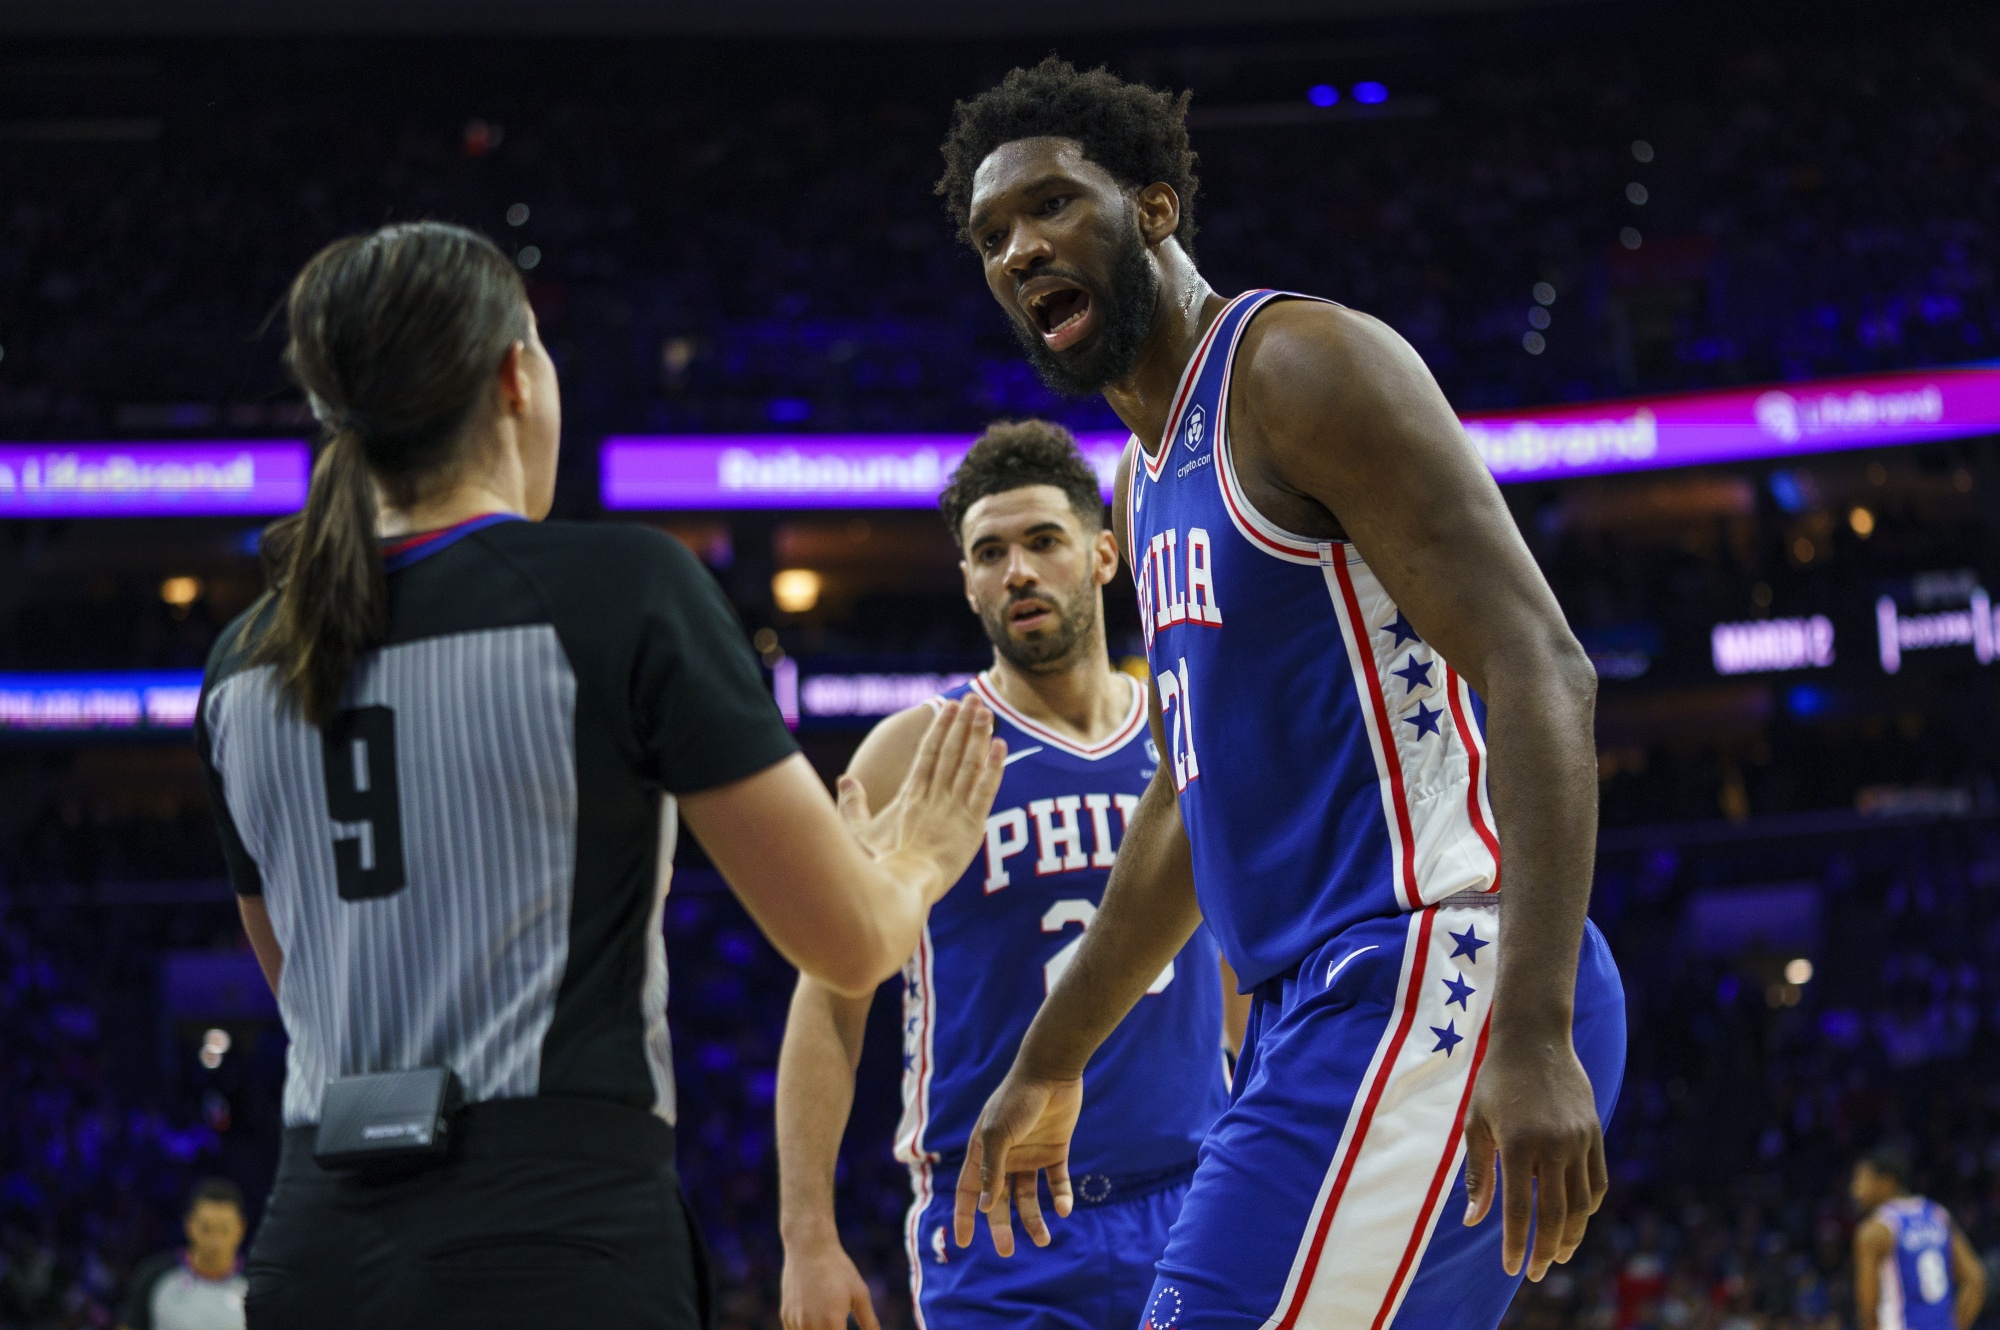 Embiid scores 42 to lead way to win